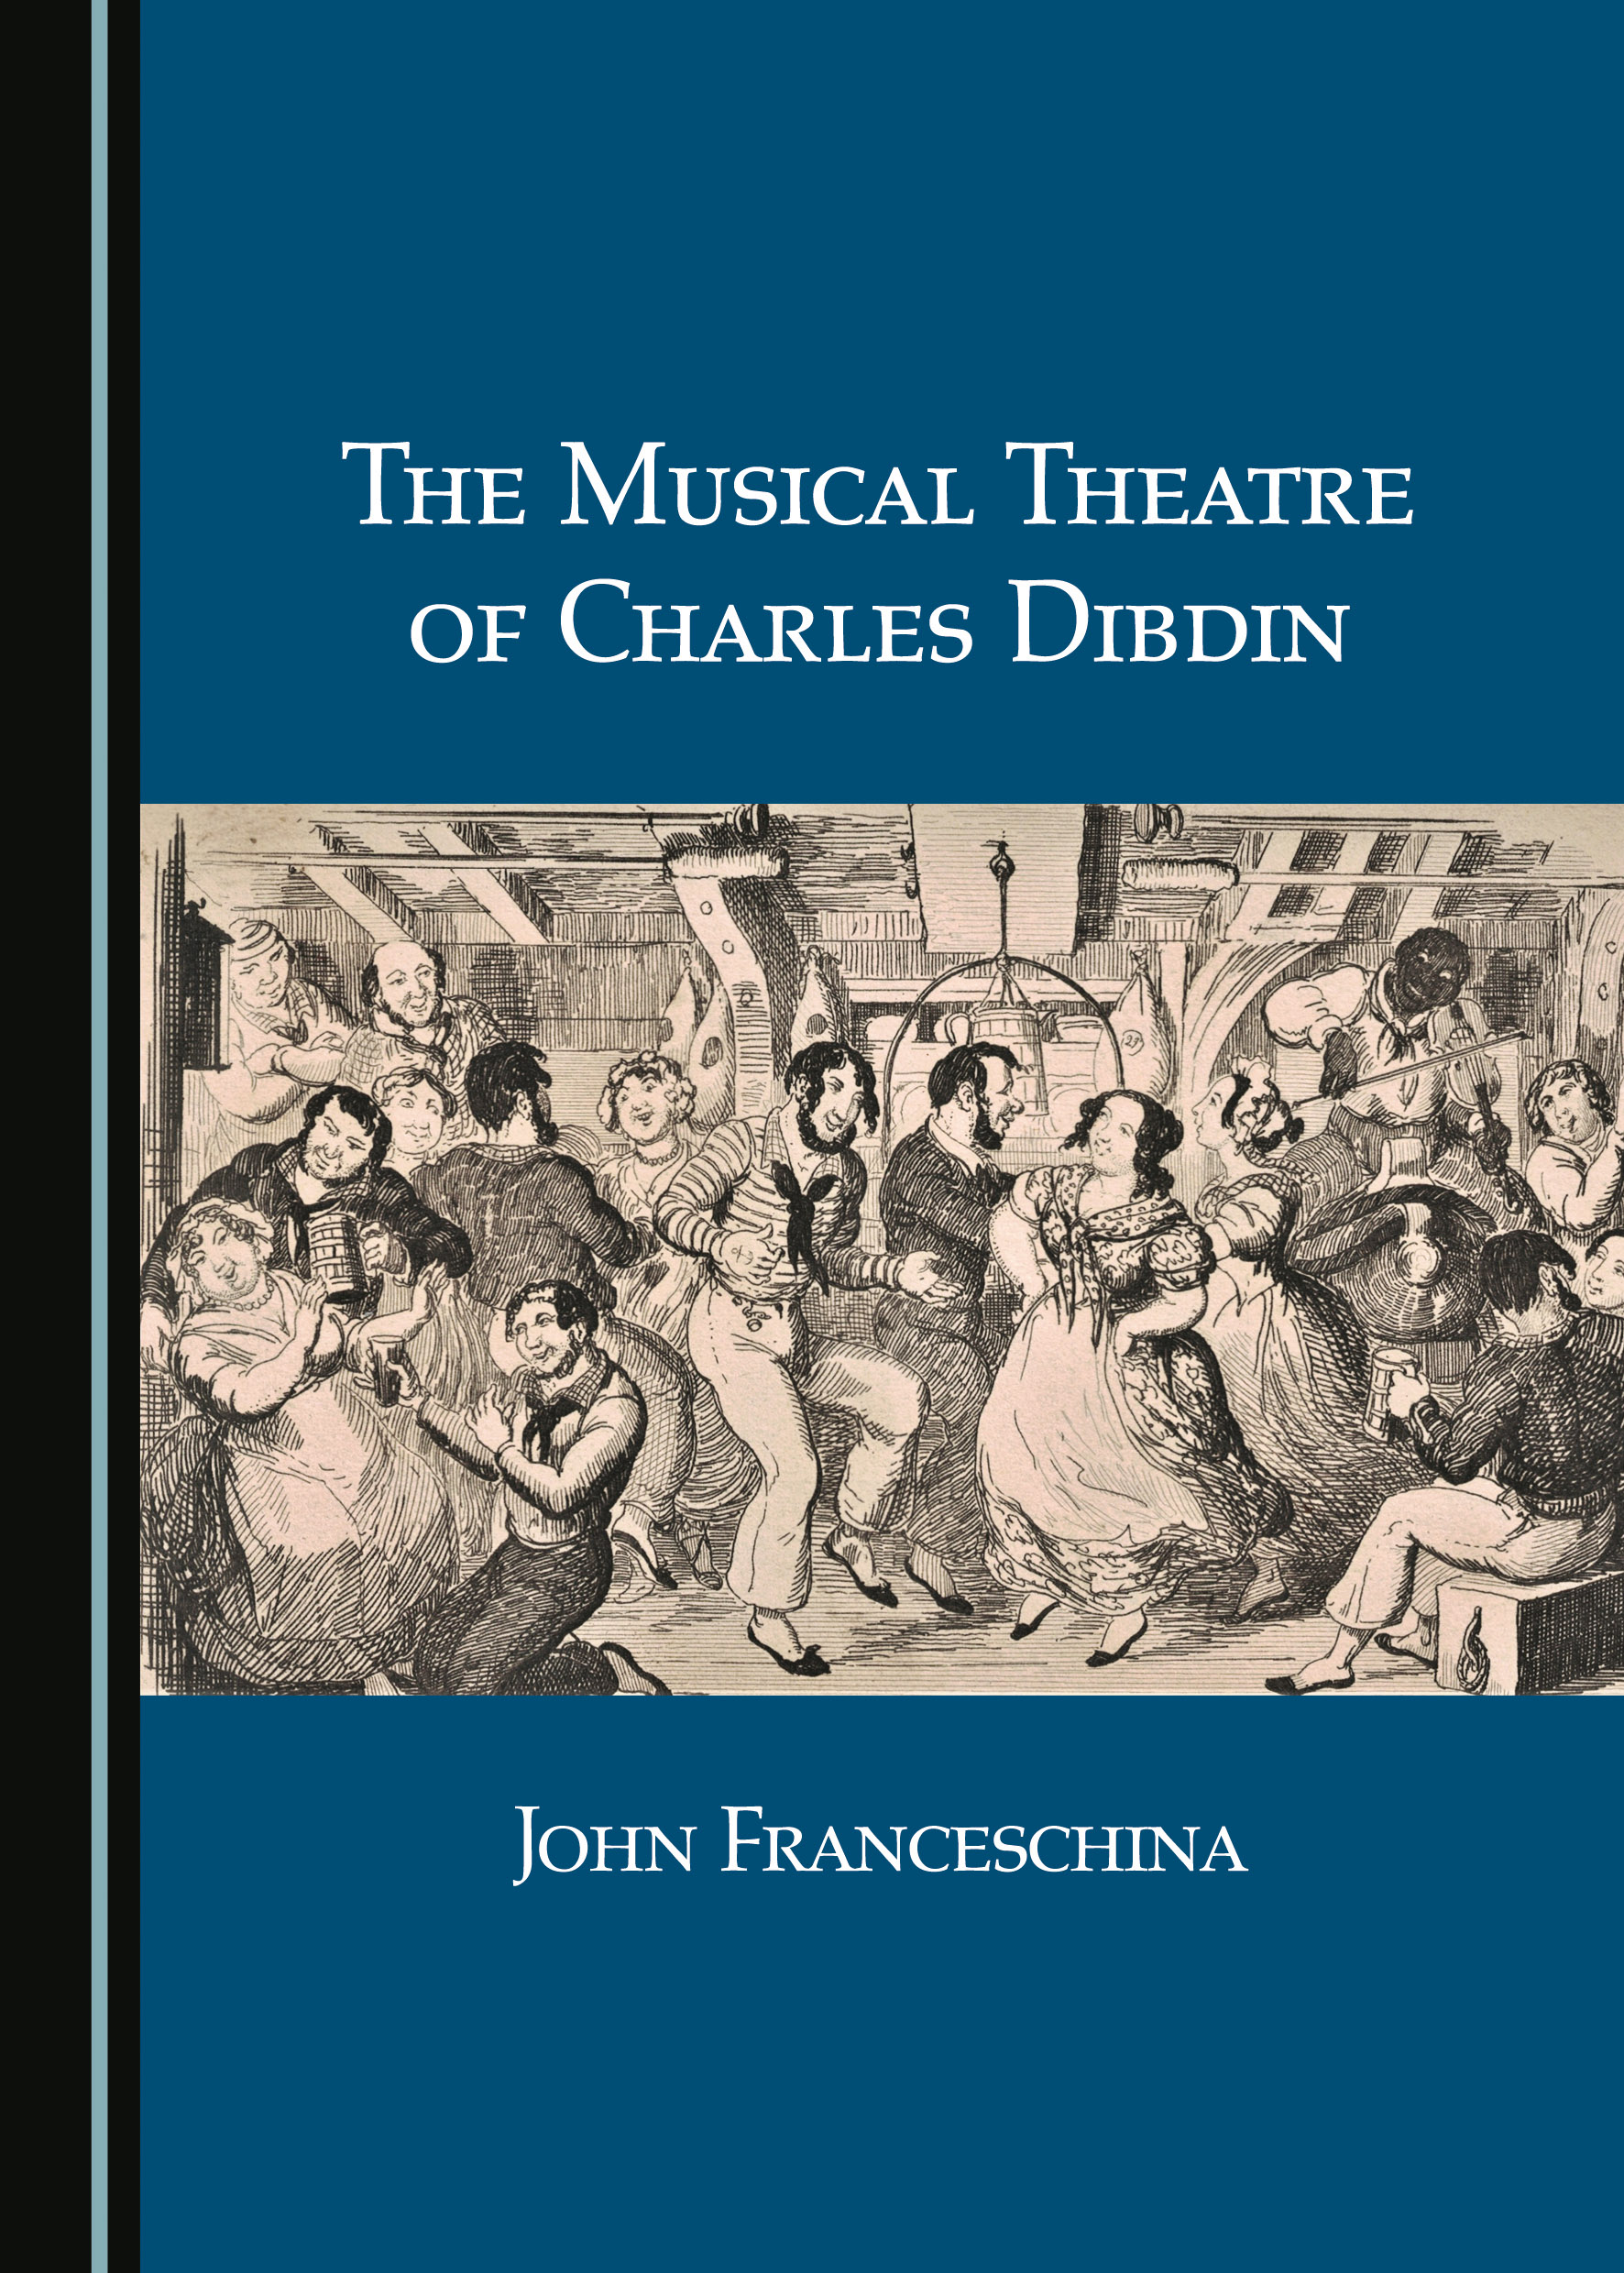 The Musical Theatre of Charles Dibdin